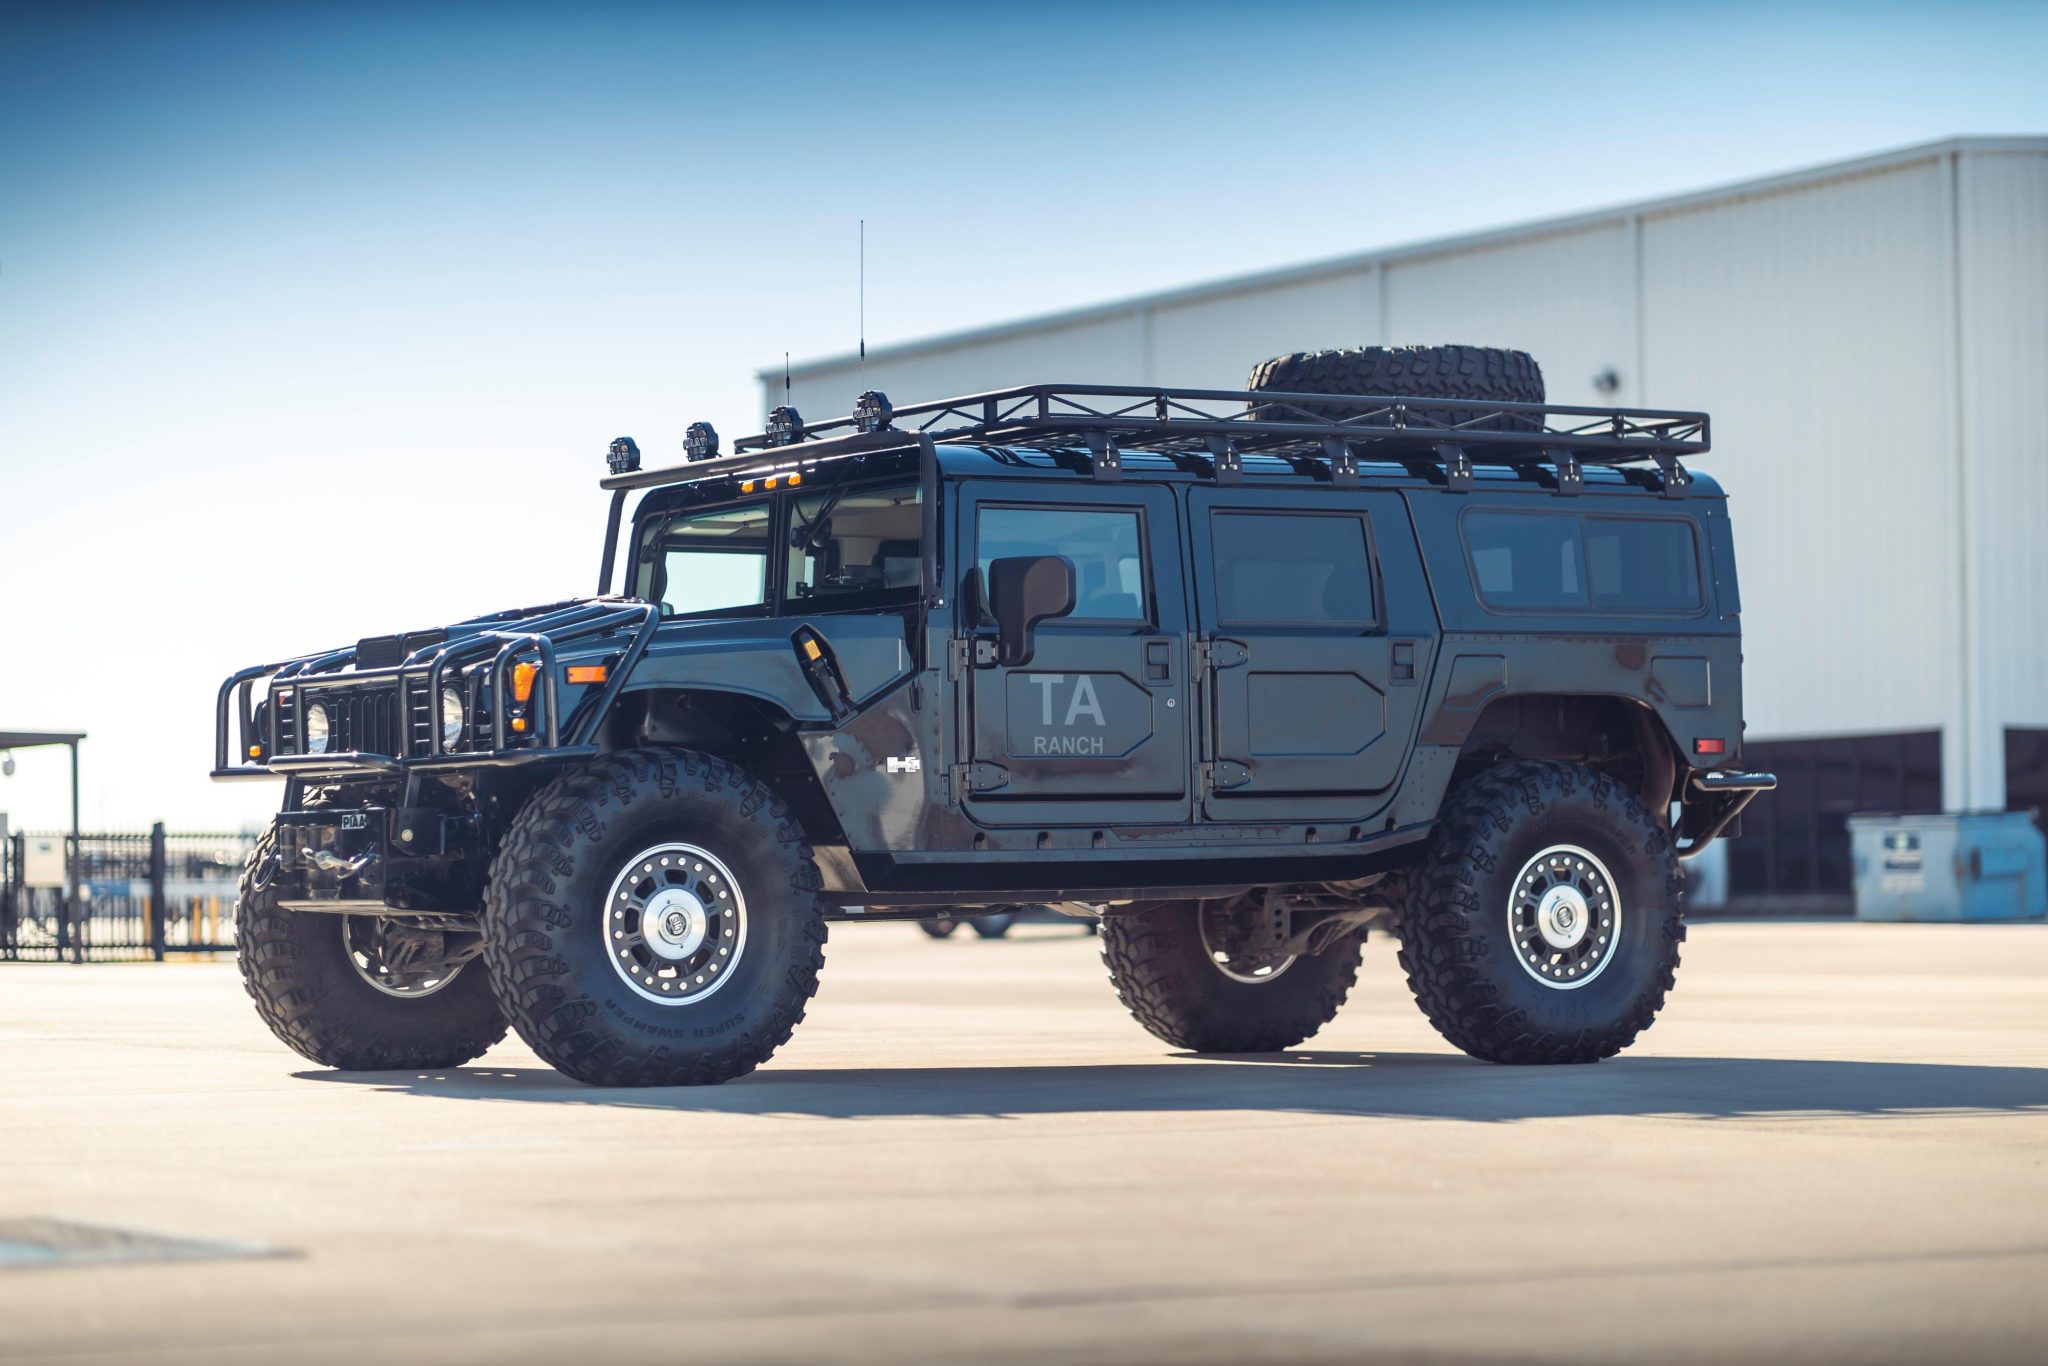 2006 Hummer H1 Alpha Is One Cool Off-Road Rig - autoevolution